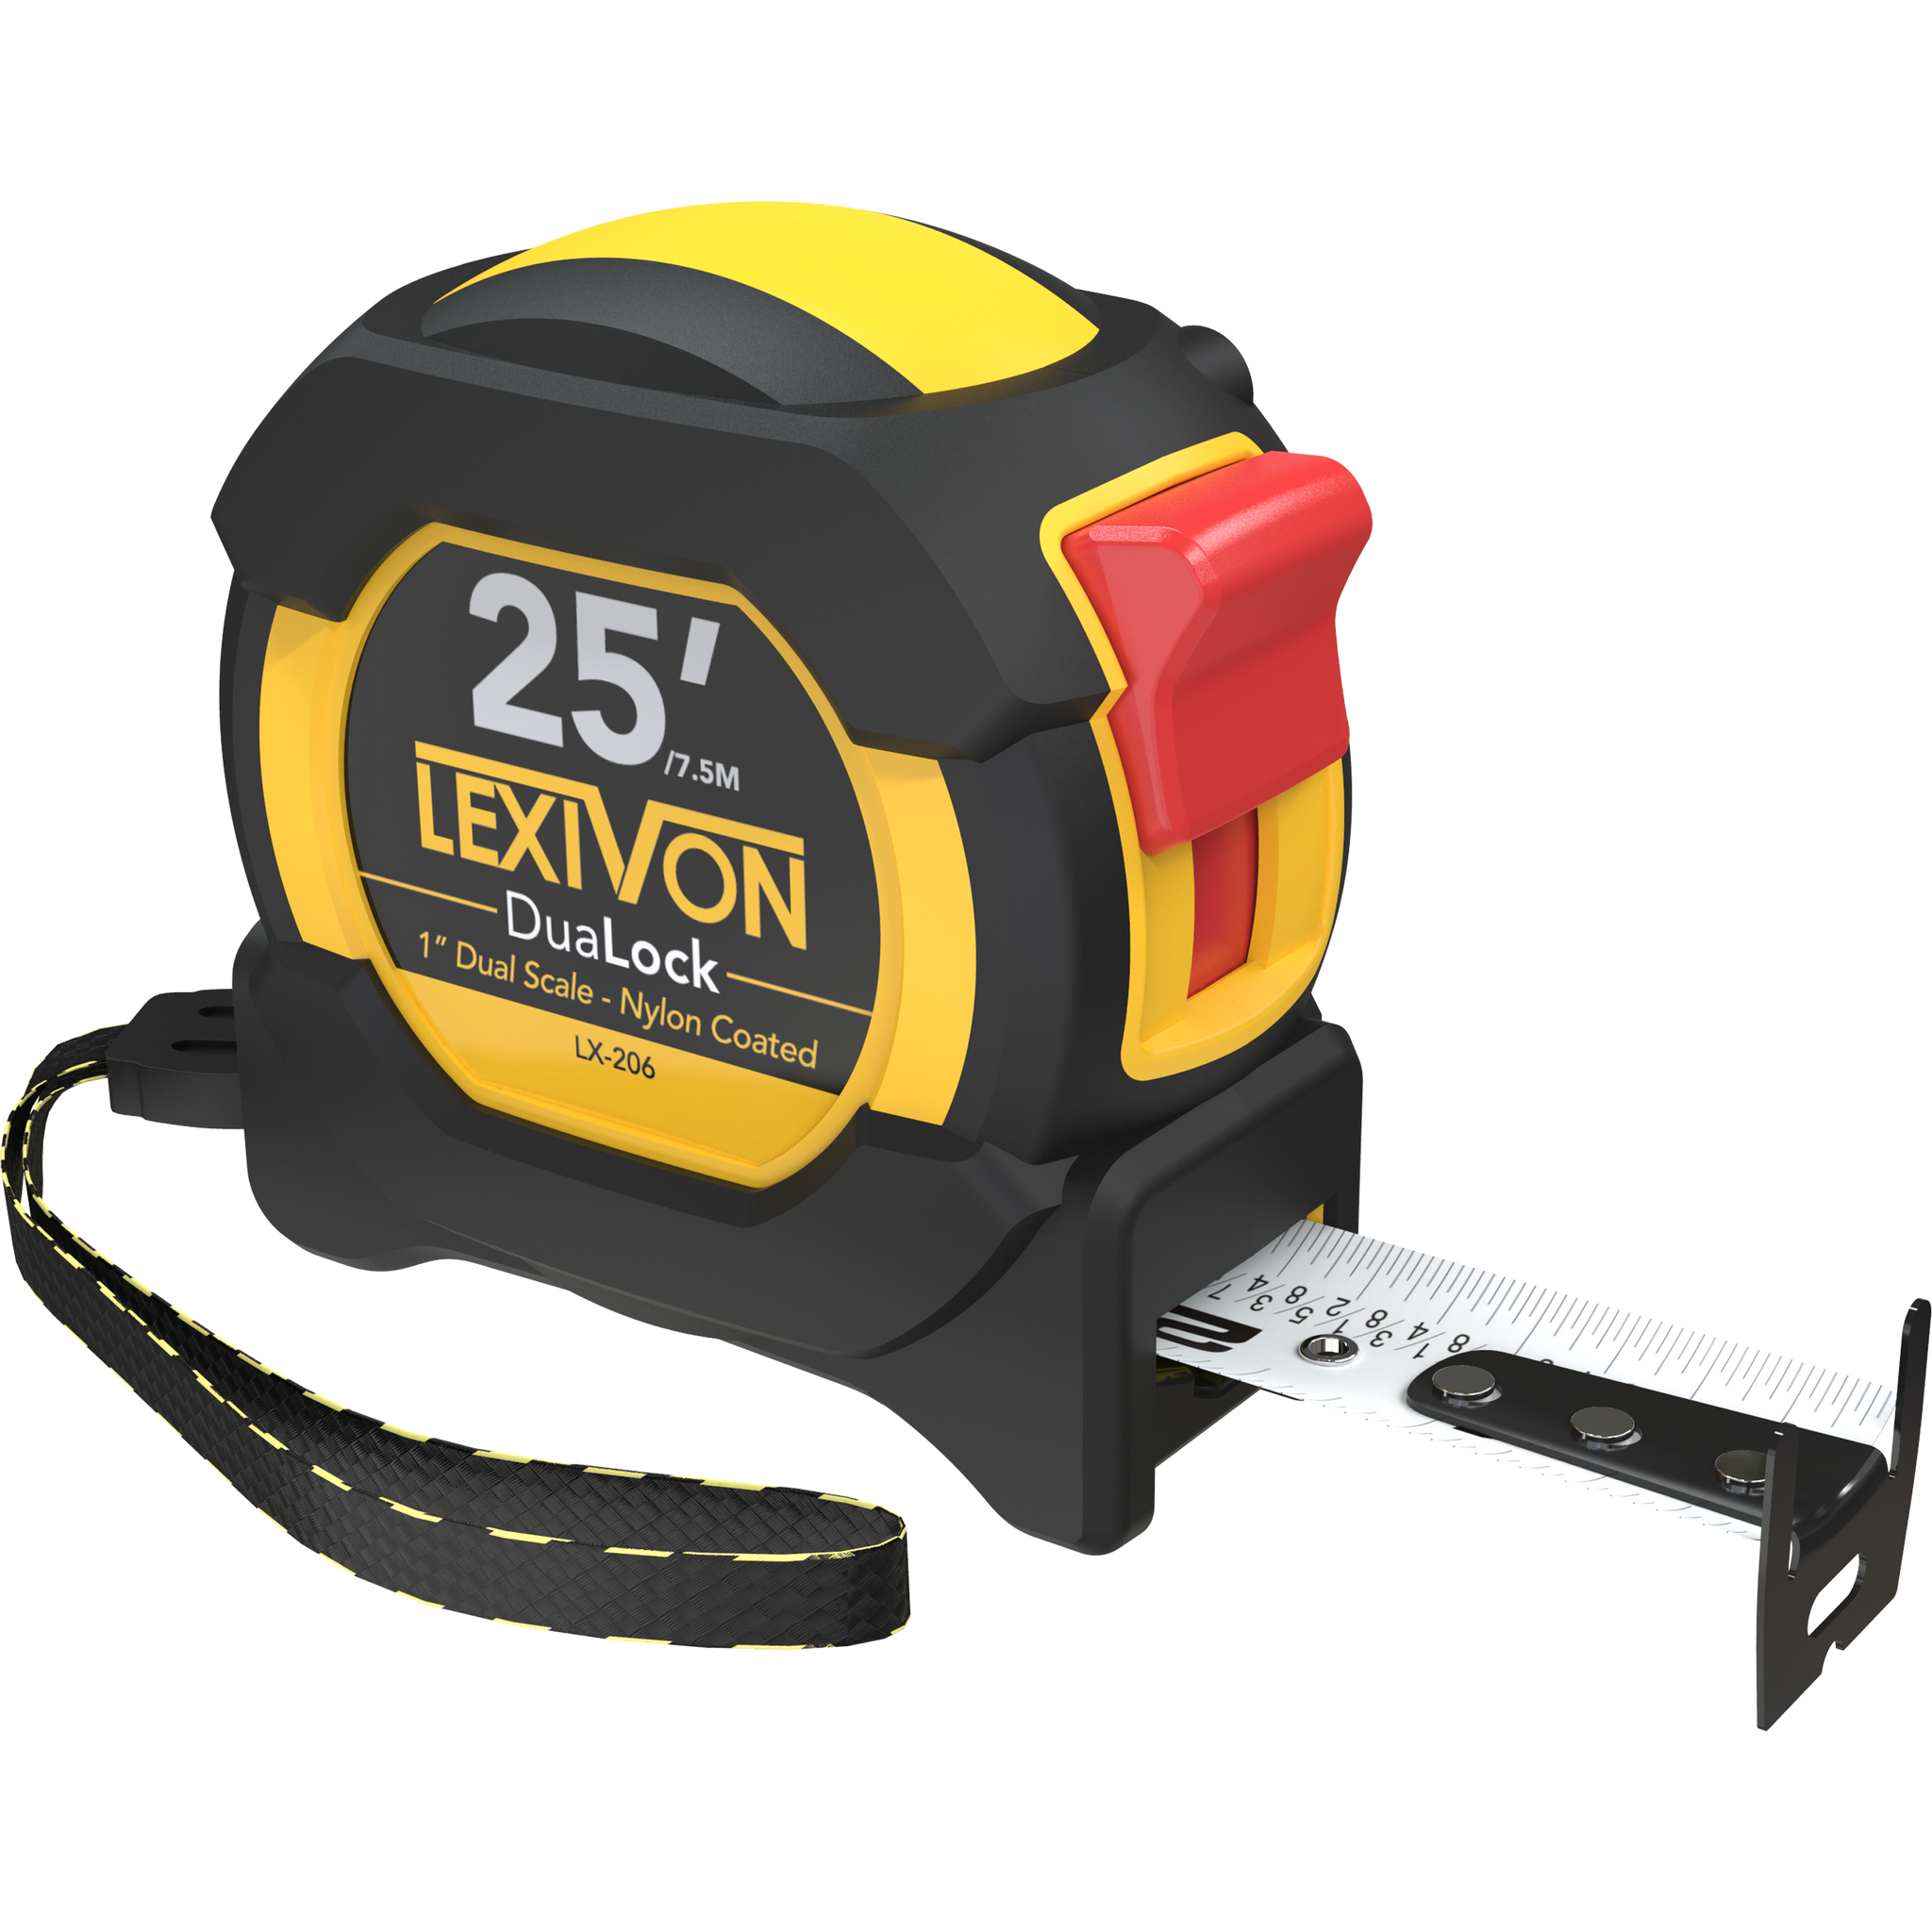 25ft. Compact Easy Grip Tape Measure